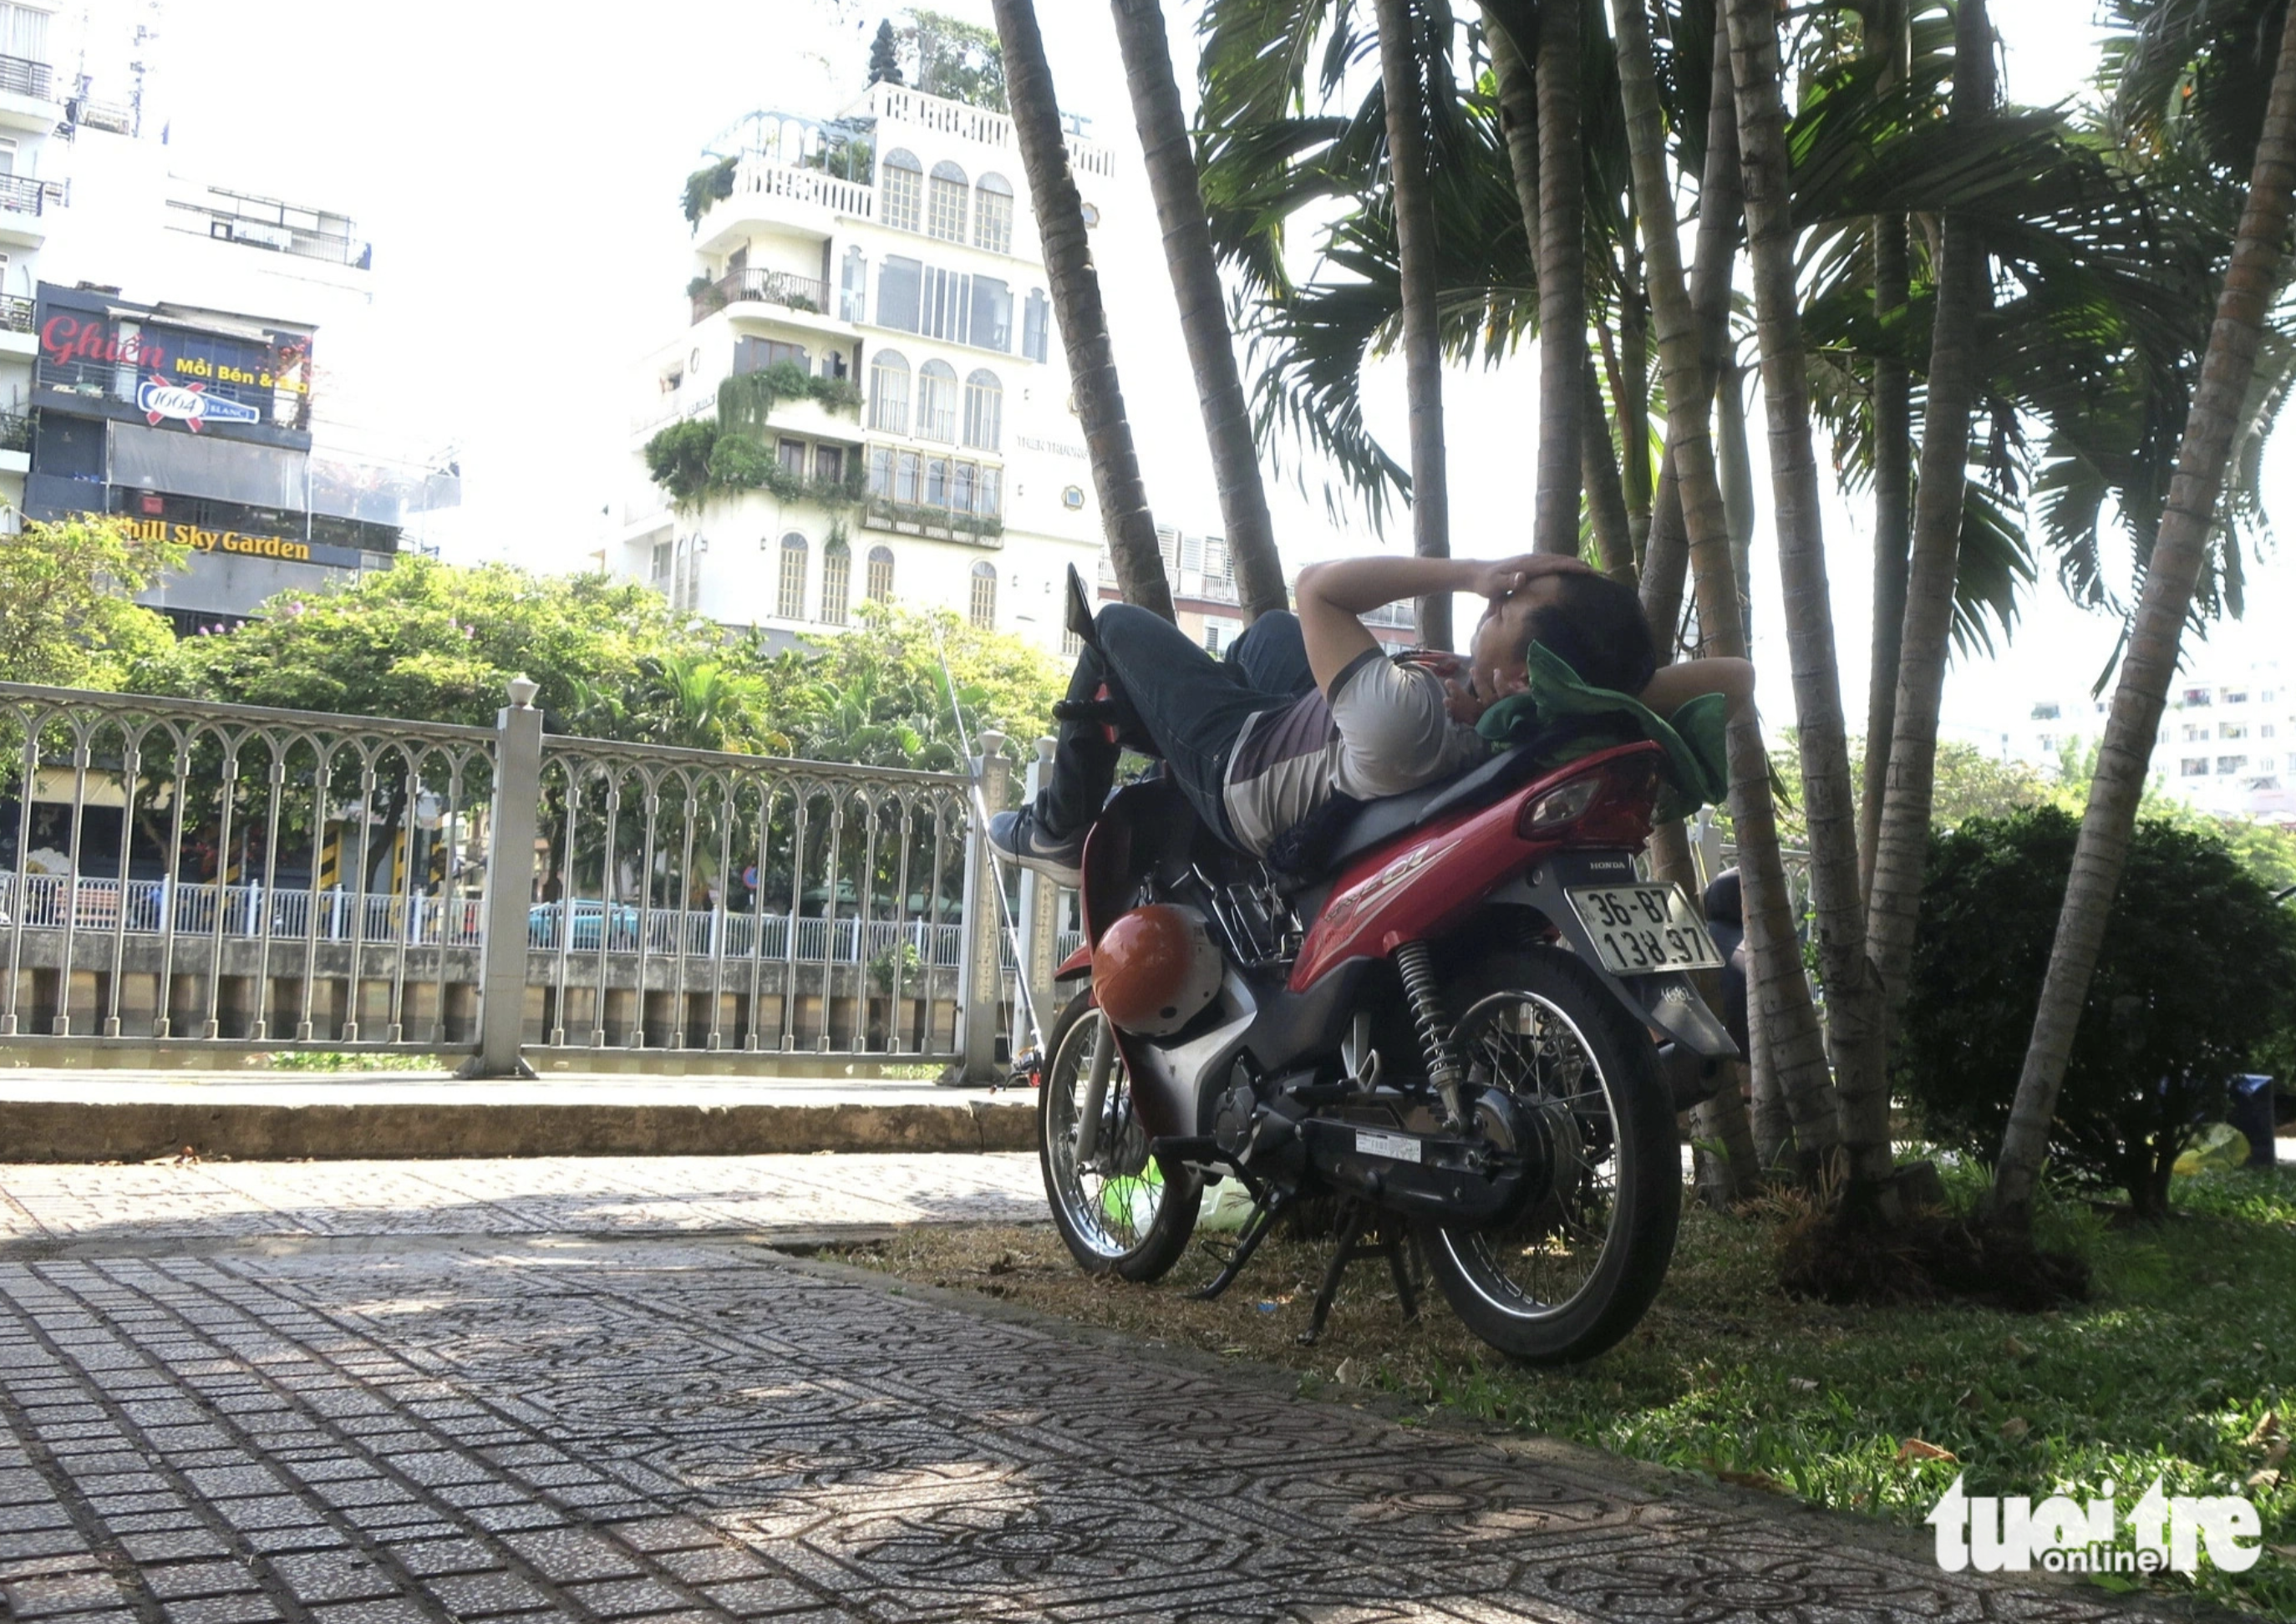 A man takes a nap on his motorbike in the shadow of trees near a canal along Hoang Sa Street, Phu Nhuan District, Ho Chi Minh City. Photo: T.T.D. / Tuoi Tre